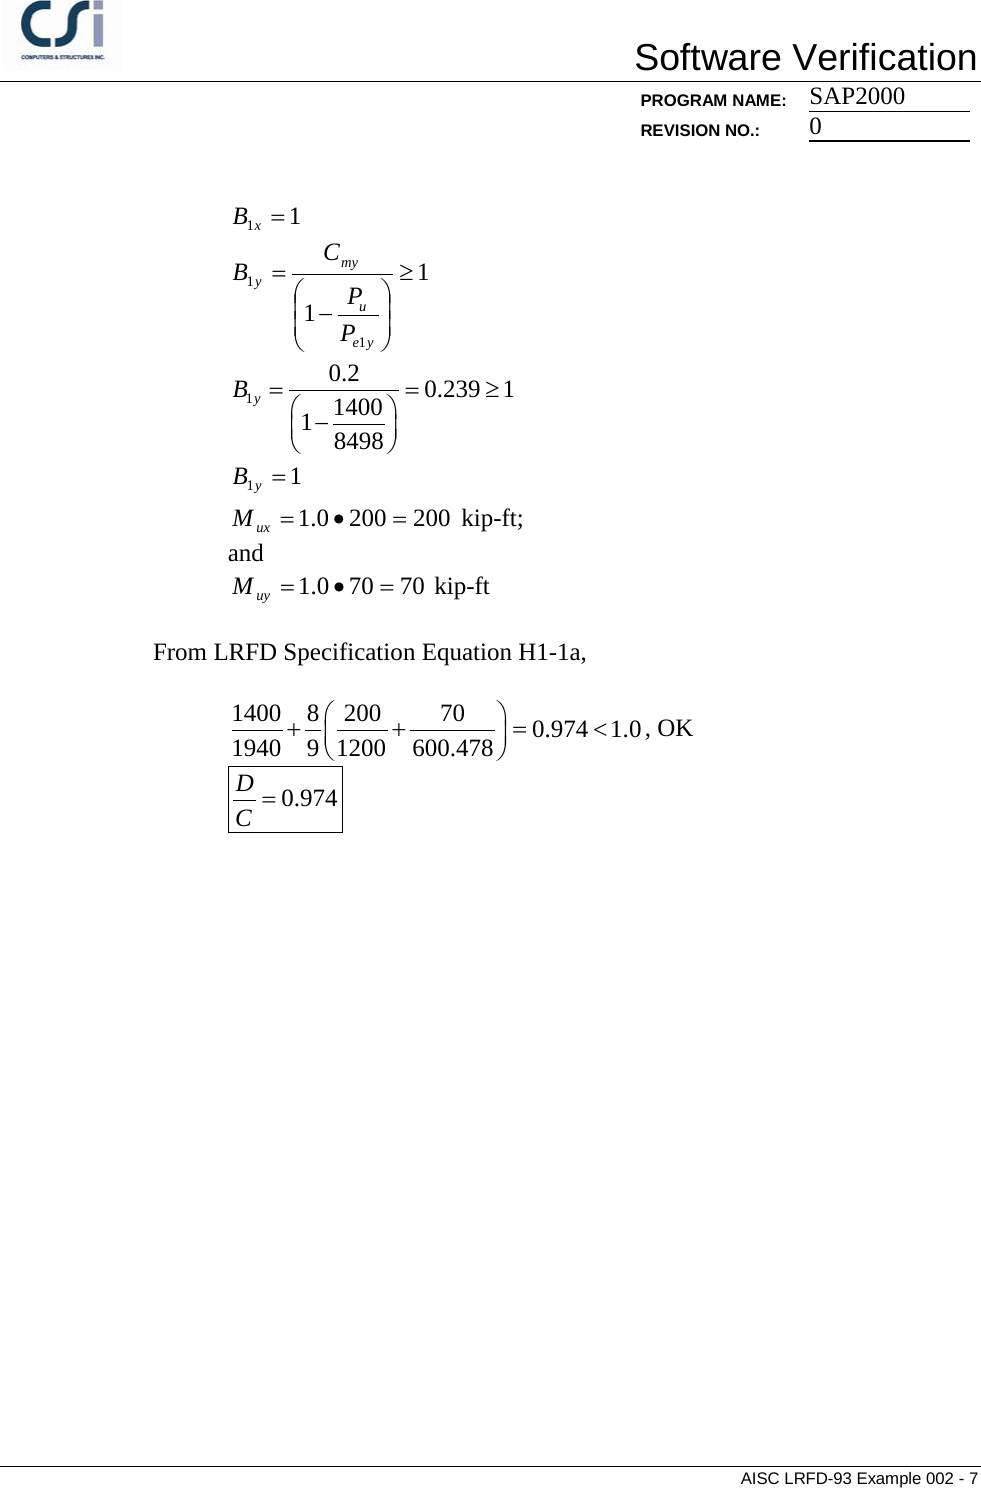 Page 7 of 7 - Contents AISC LRFD-93 Example 002